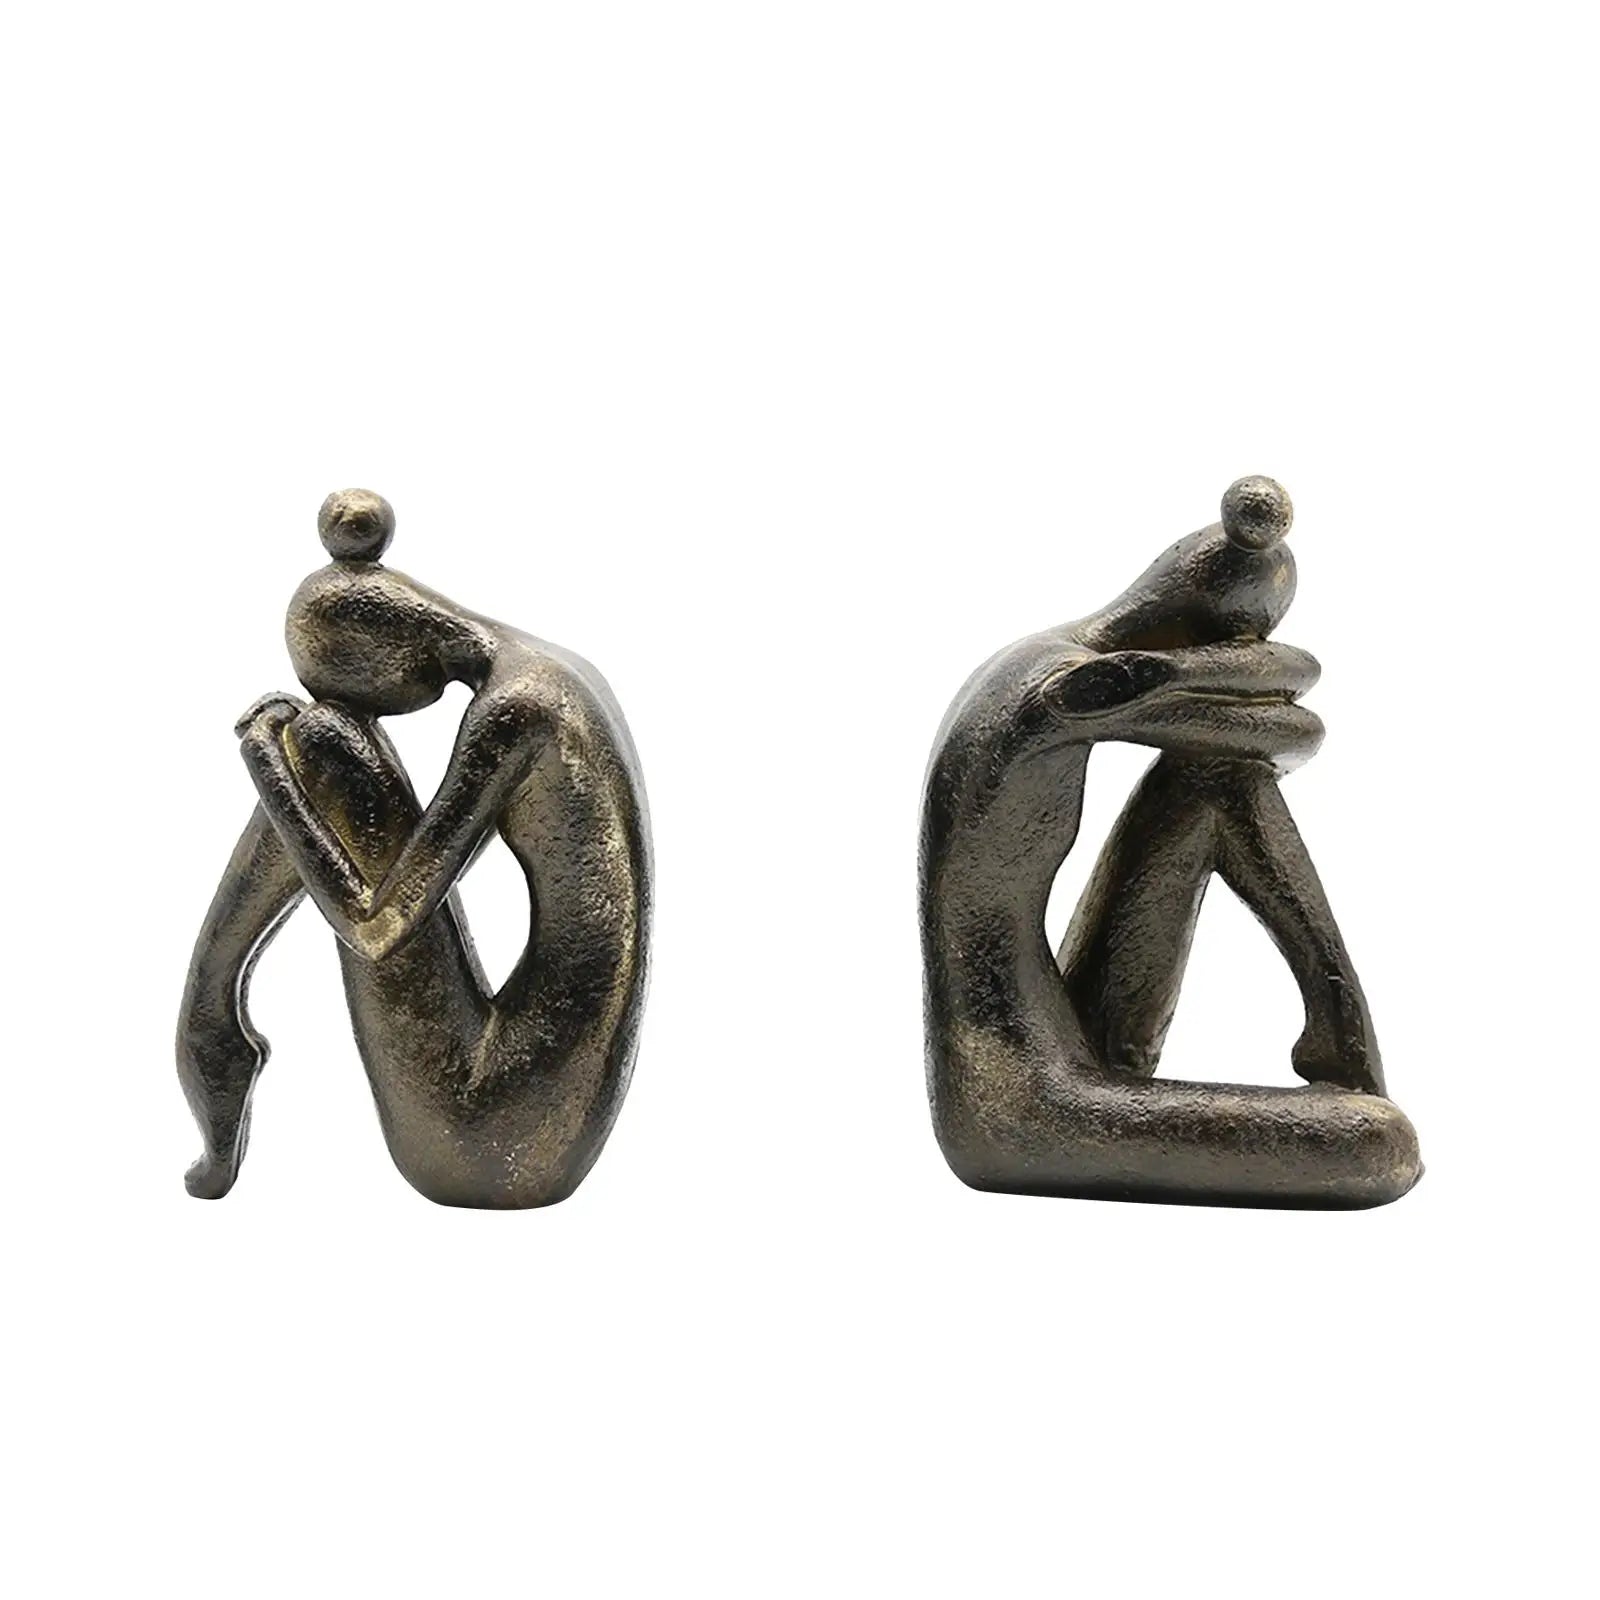 Decorative Metal Bookend Of Thinker